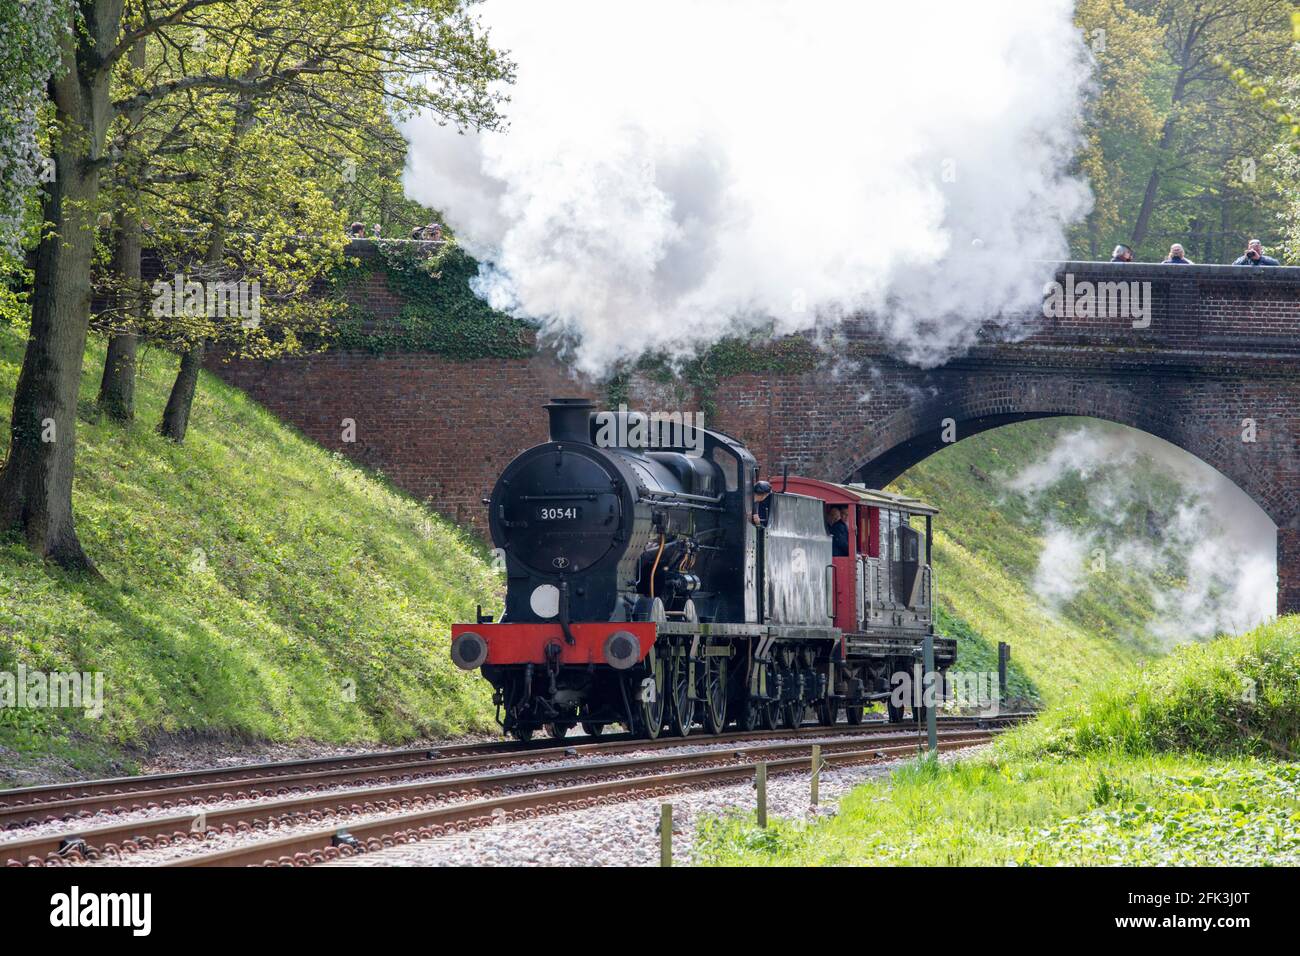 Horsted Keynes, West Sussex, England. 1938 SR Q Class steam locomotive on the Bluebell Railway line. Stock Photo